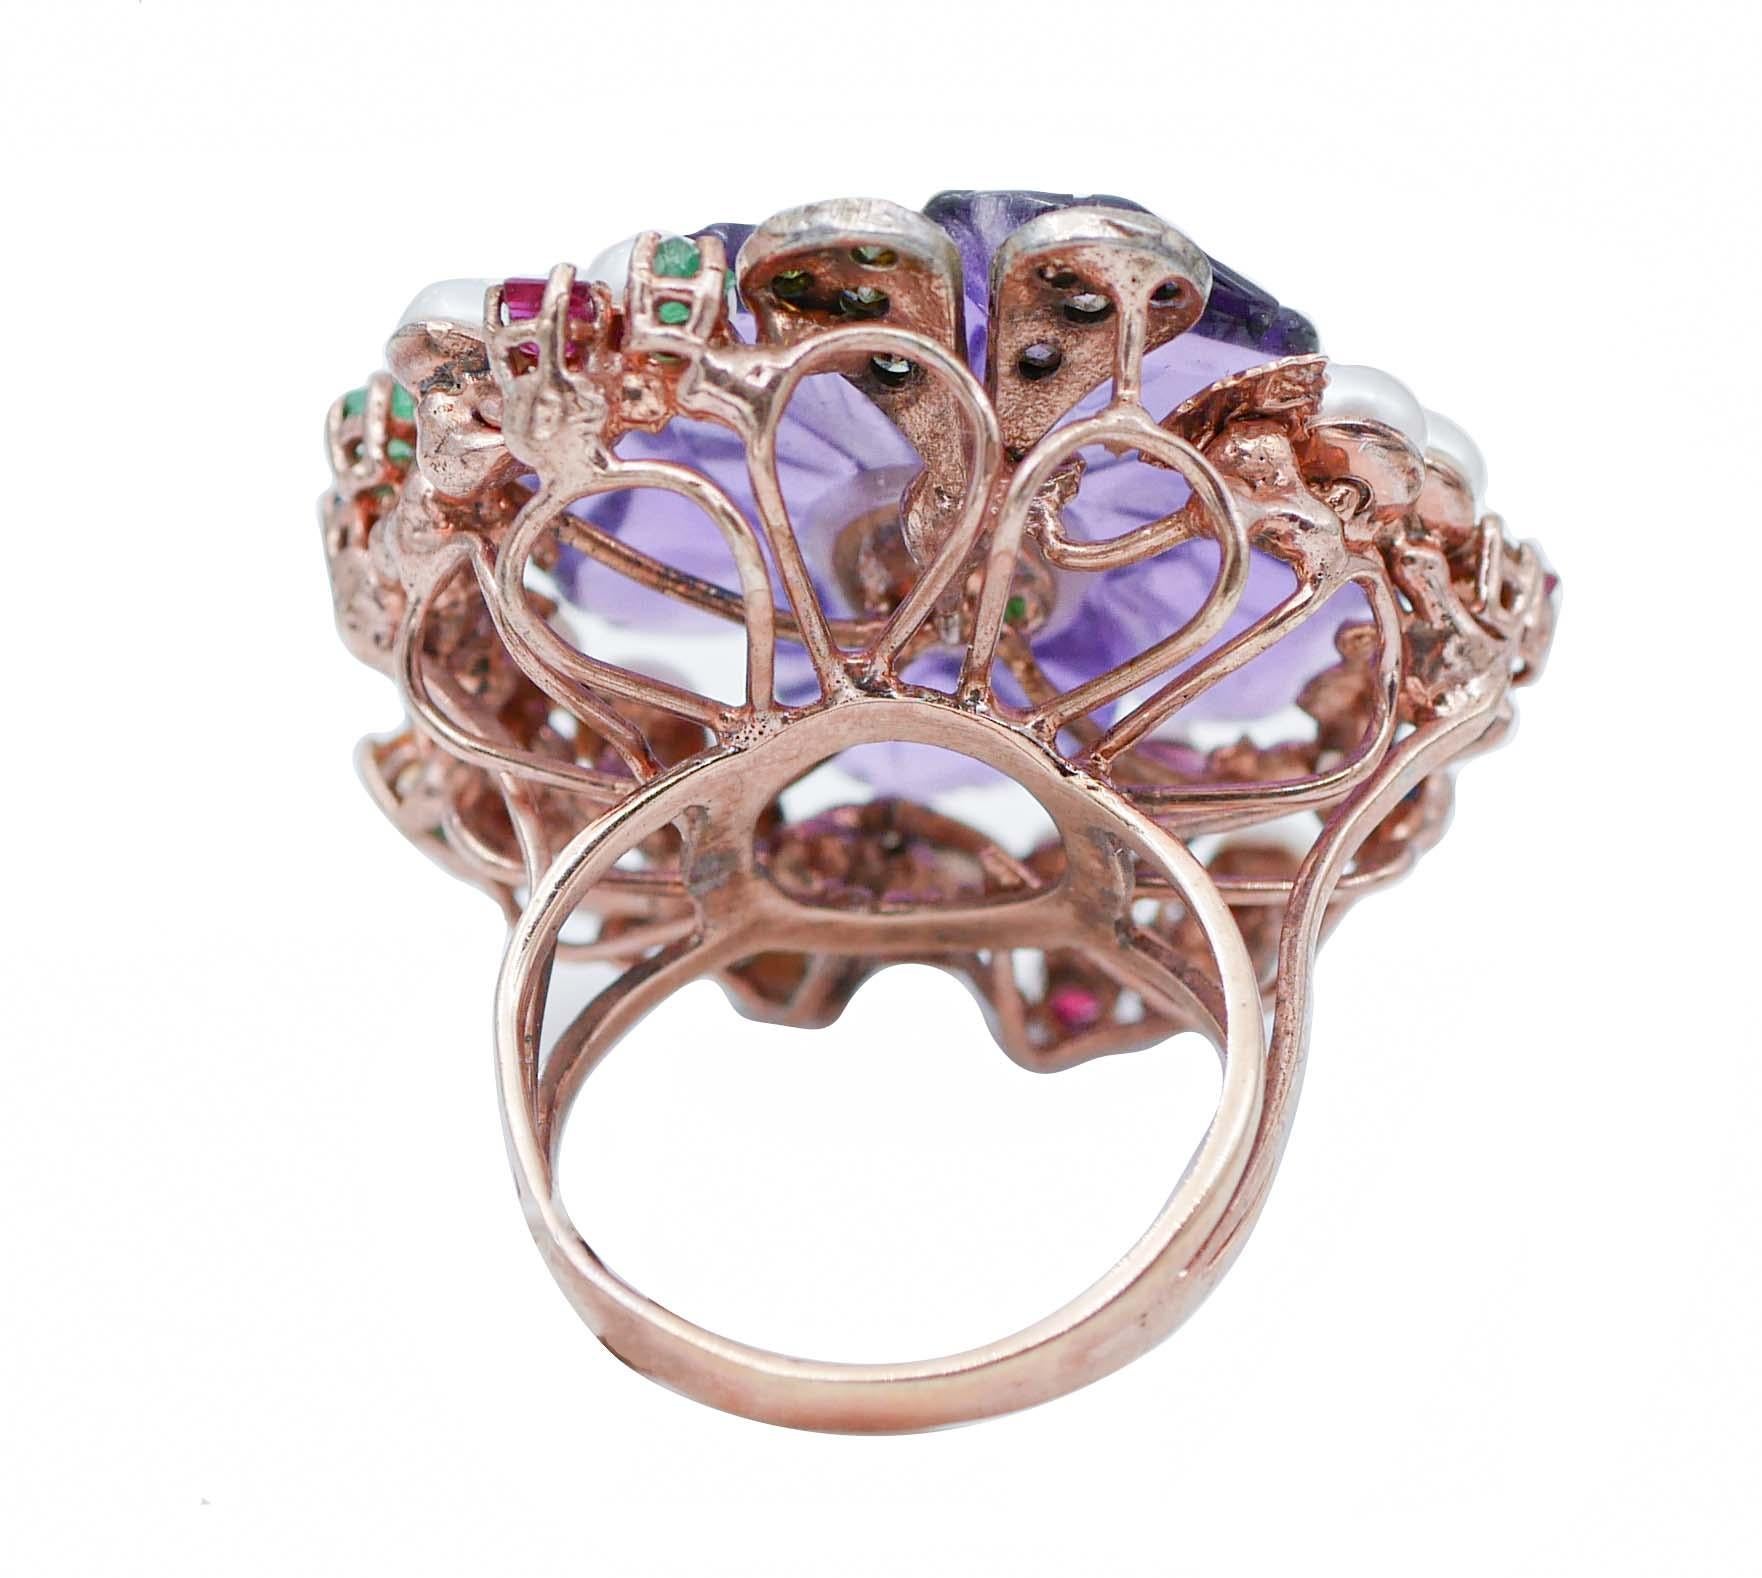 Retro Amethyst, Pearls, Rubies, Sapphires, Emeralds, Diamonds, Gold and Silver Ring For Sale